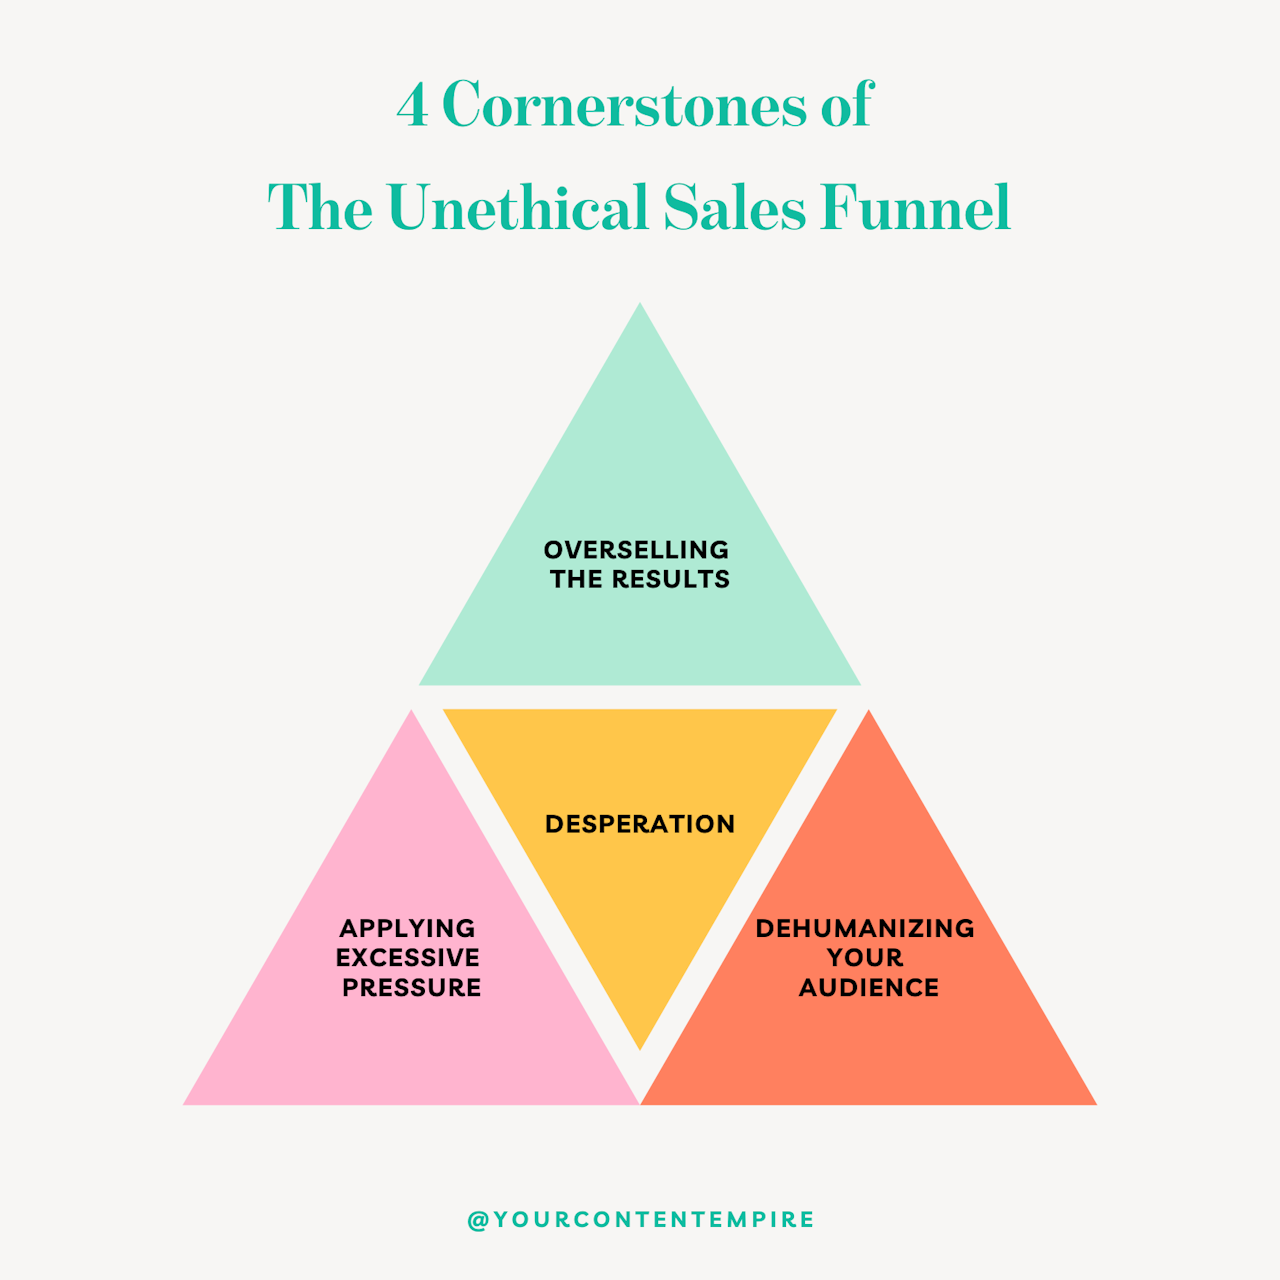 Unethical sales tactics to avoid